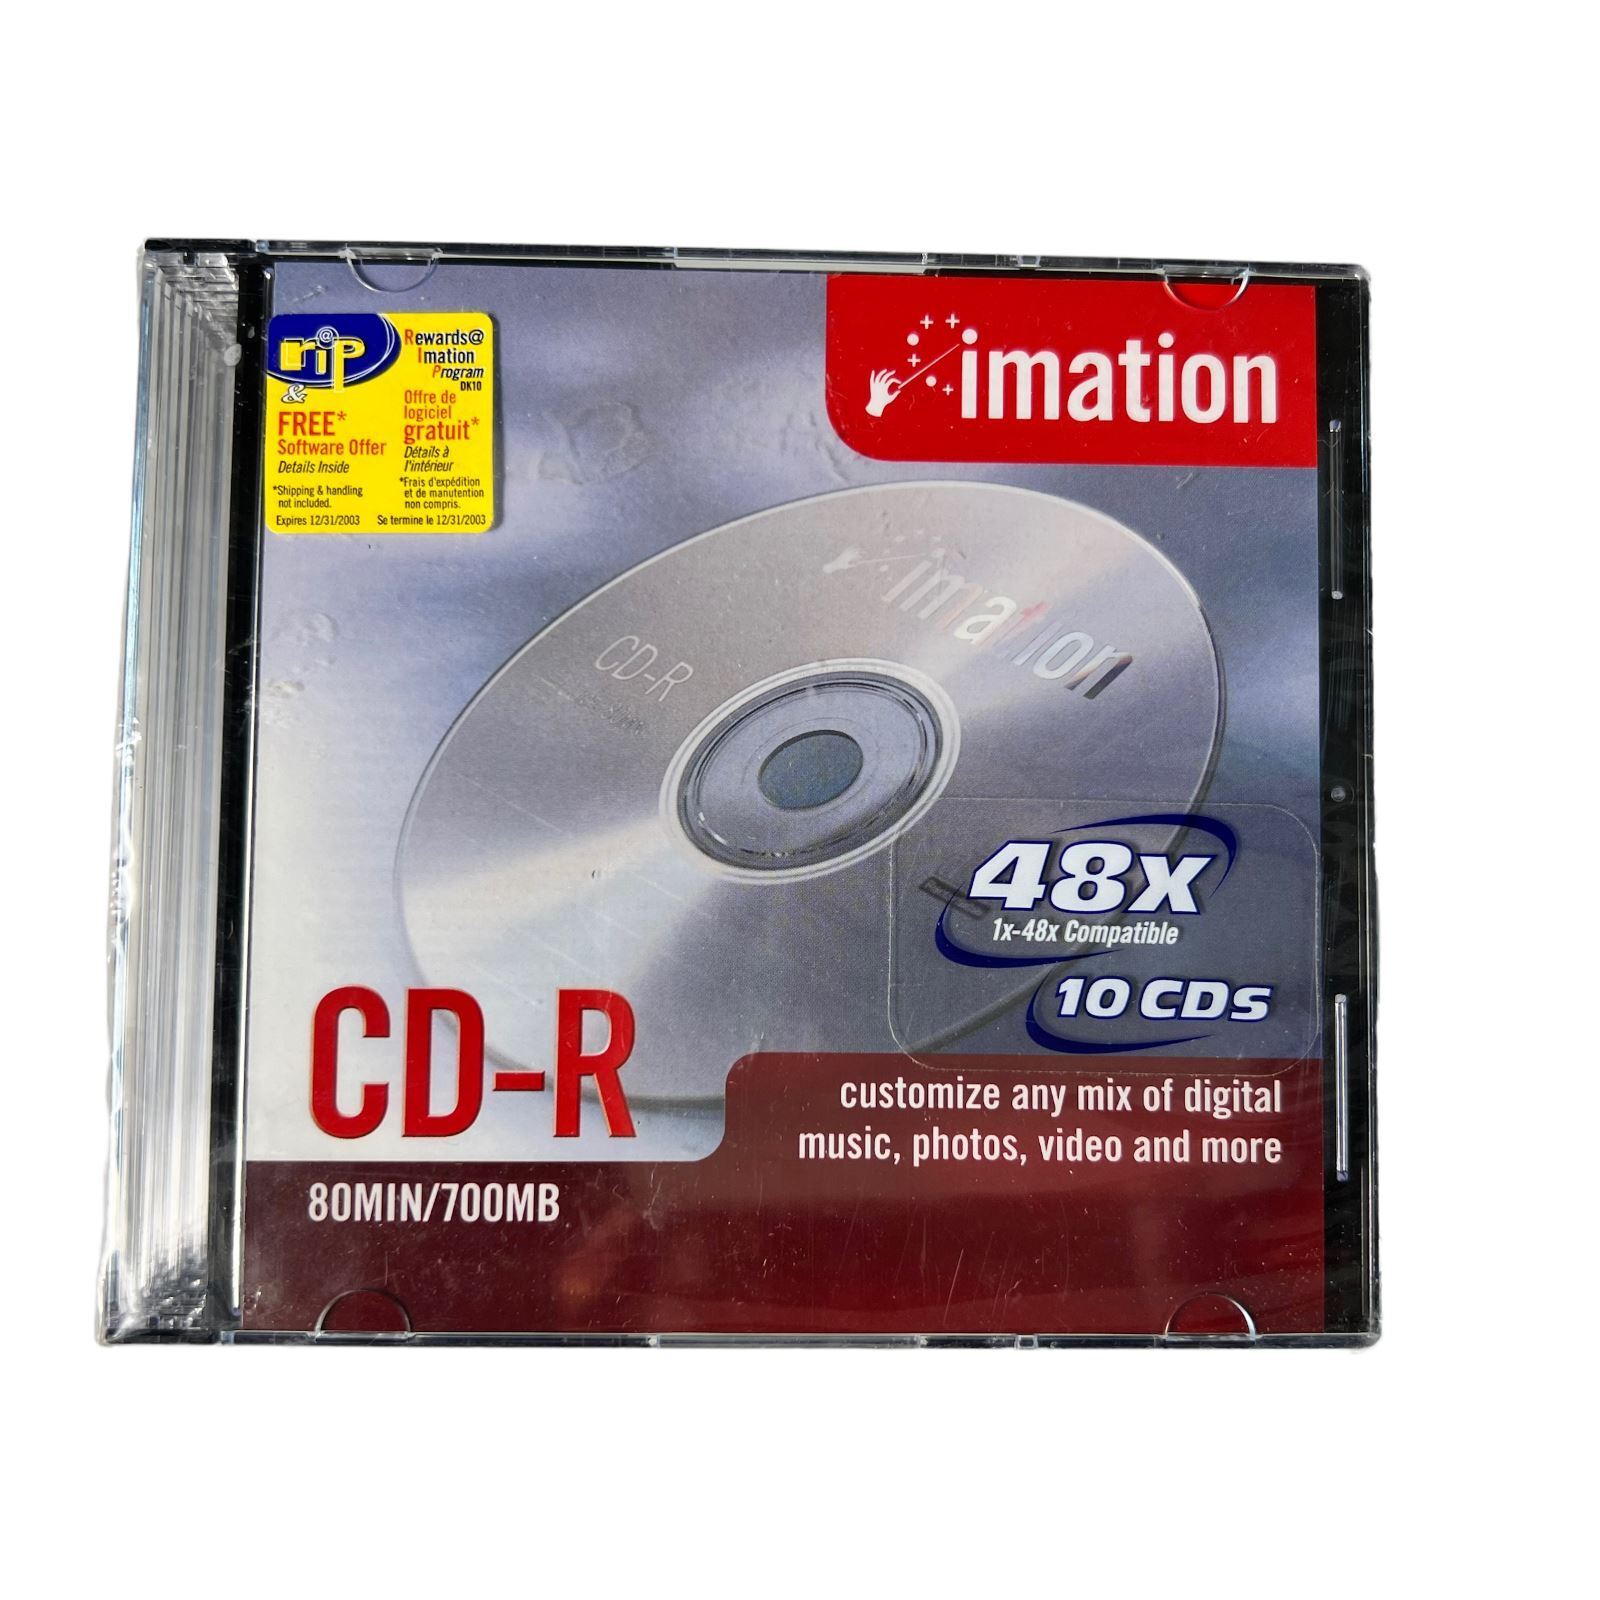 Imation Neon CD-R 10 Pack: 48X, 700MB, 80min 